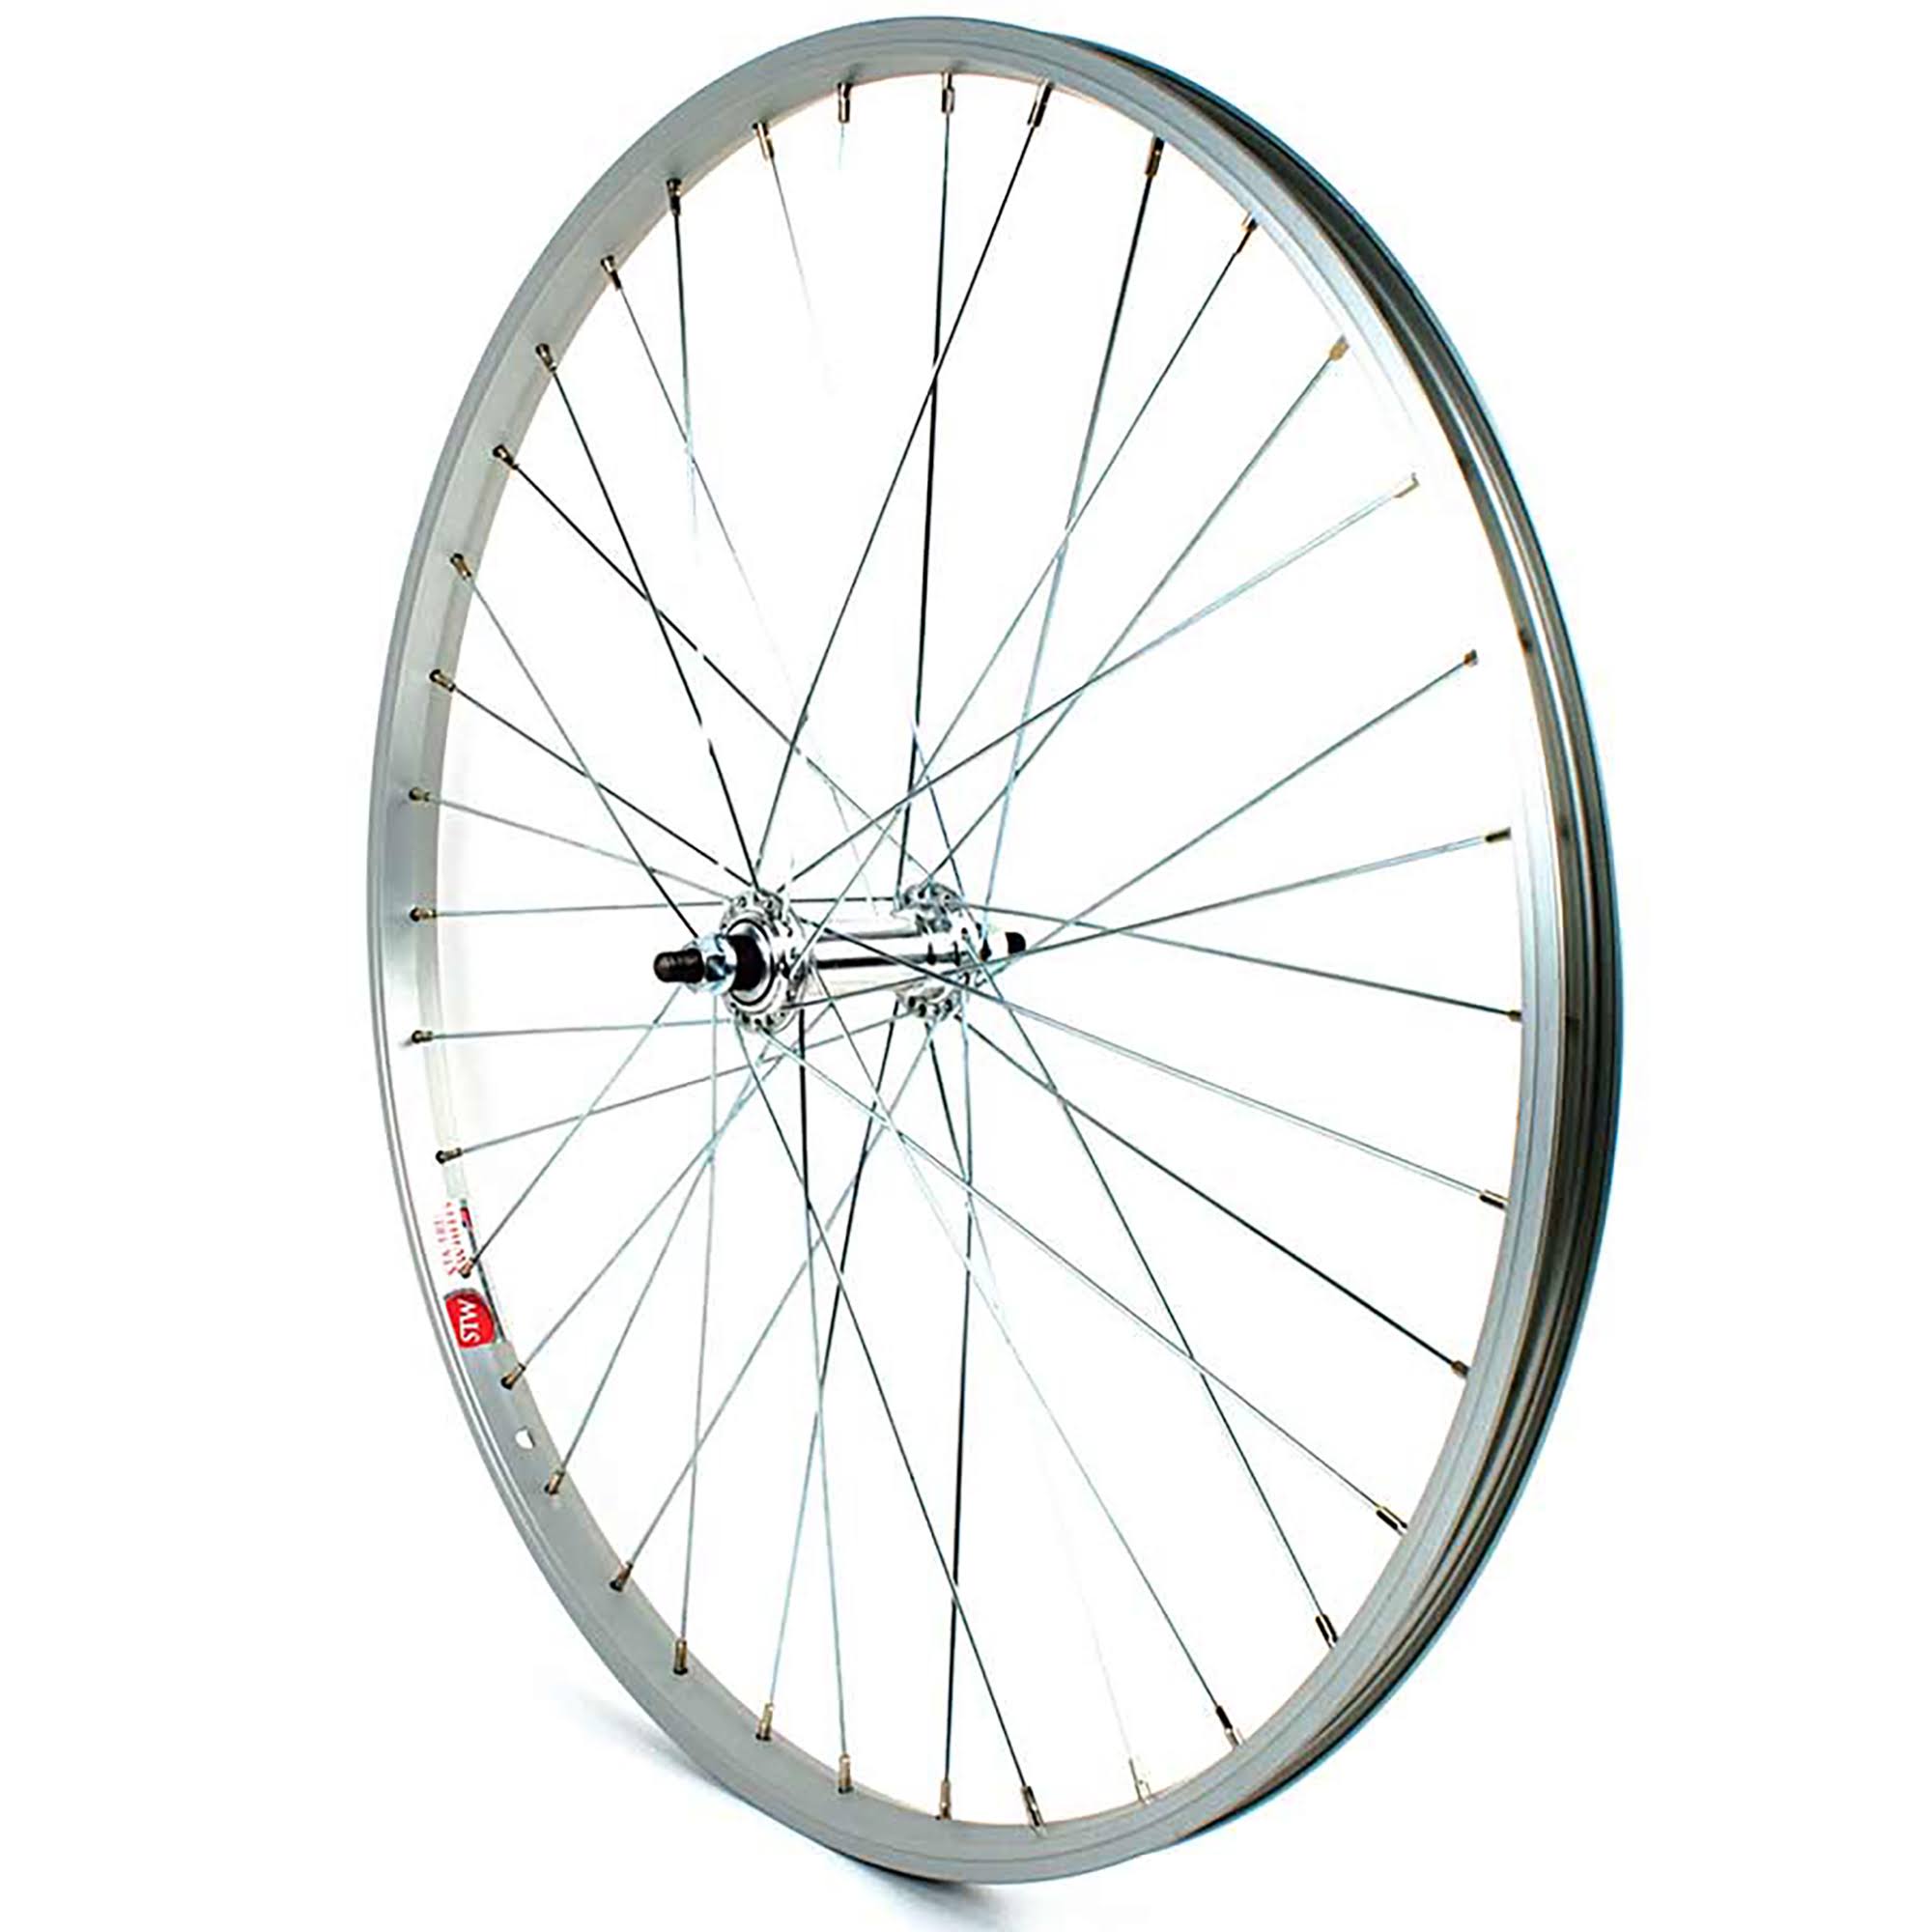 Sta-Tru 26-inch Tubeless Ready DW Front